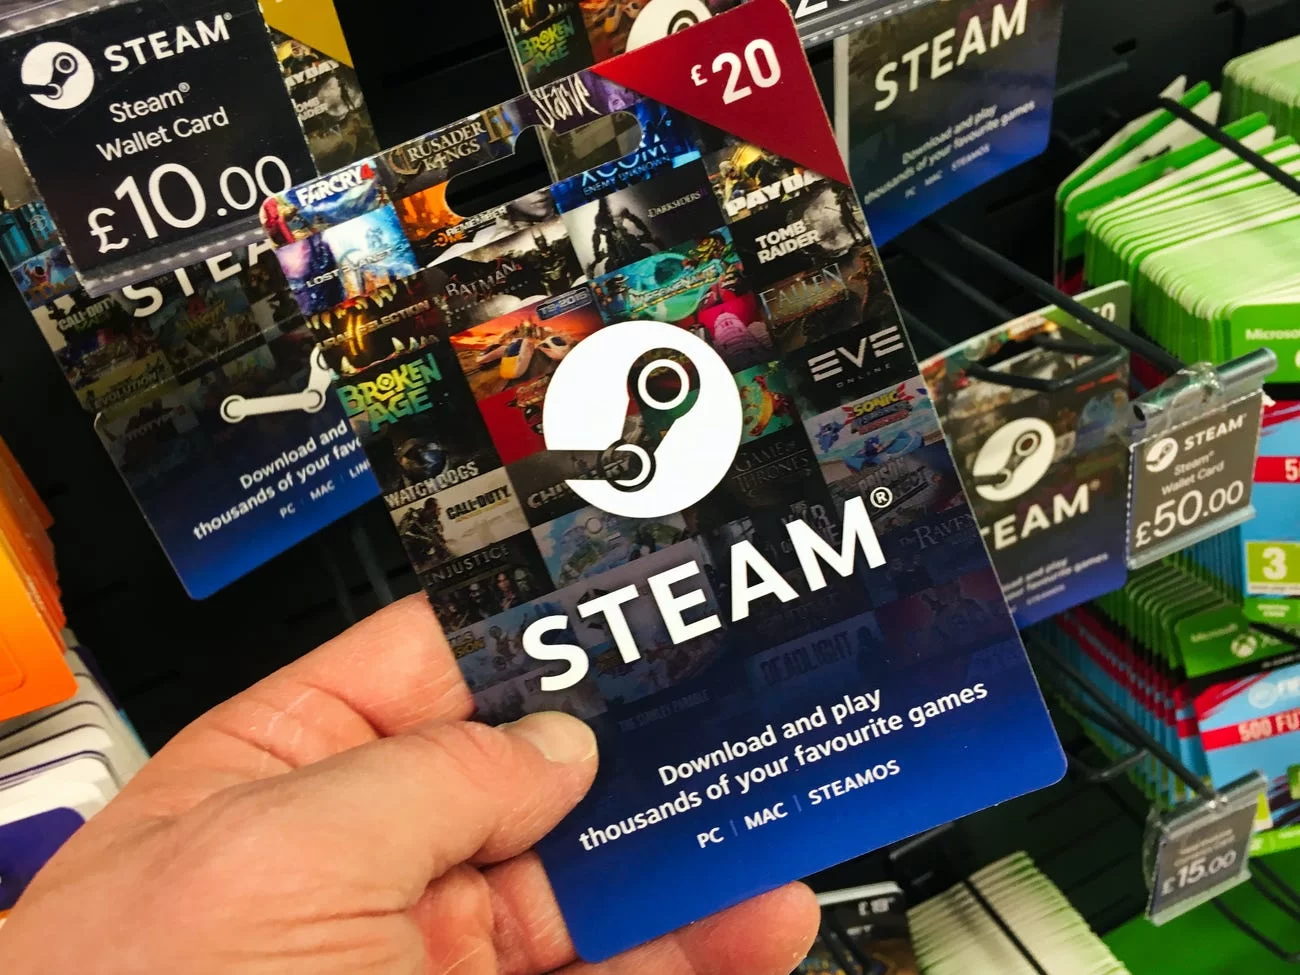 How To Send Steam Gift Card With Steam Wallet